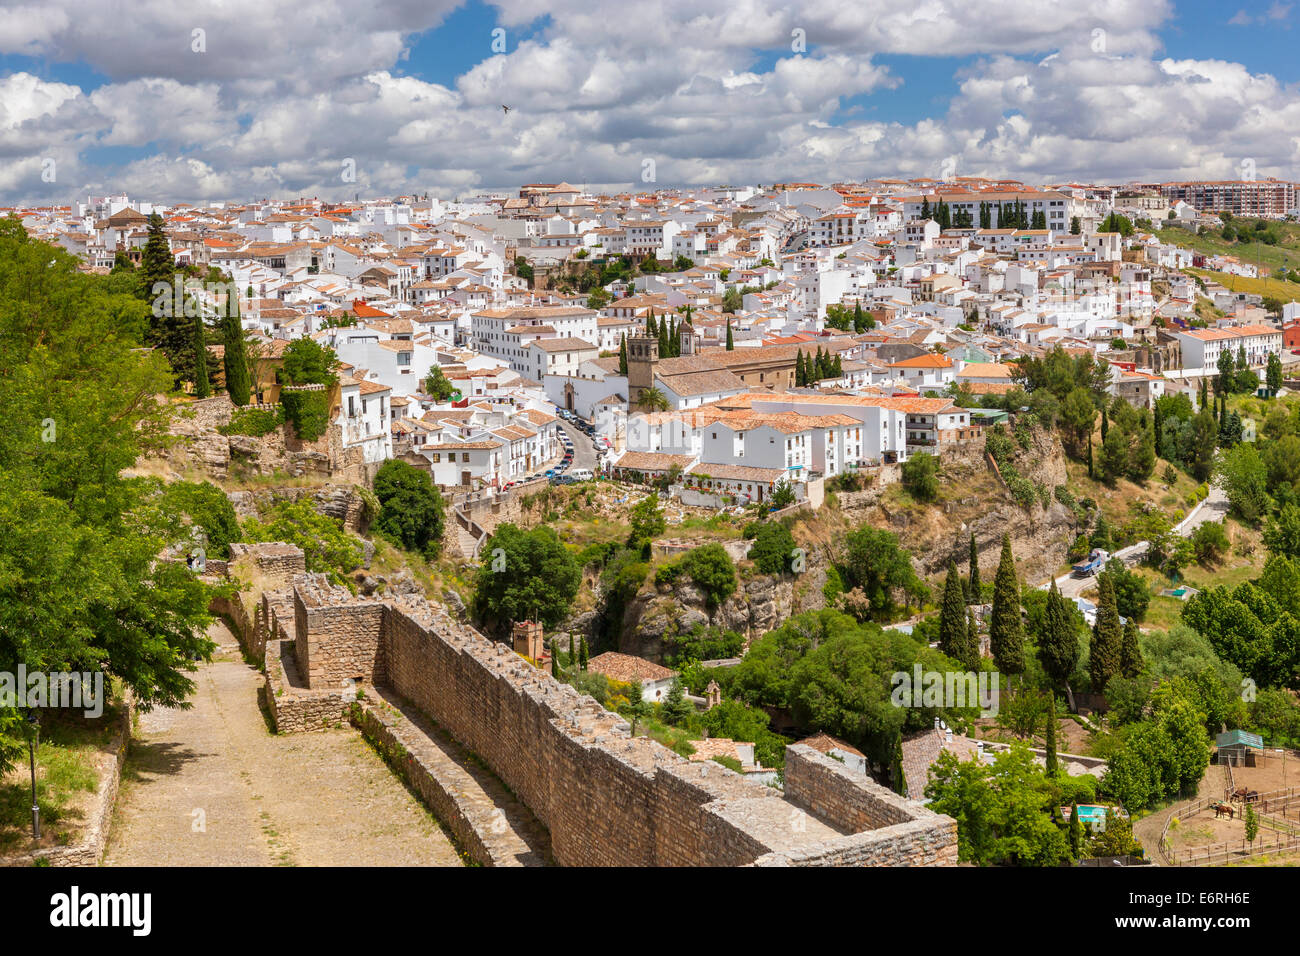 Old city walls overlooking the fields, Ronda, Malaga province, Andalusia, Spain, Europe. Stock Photo